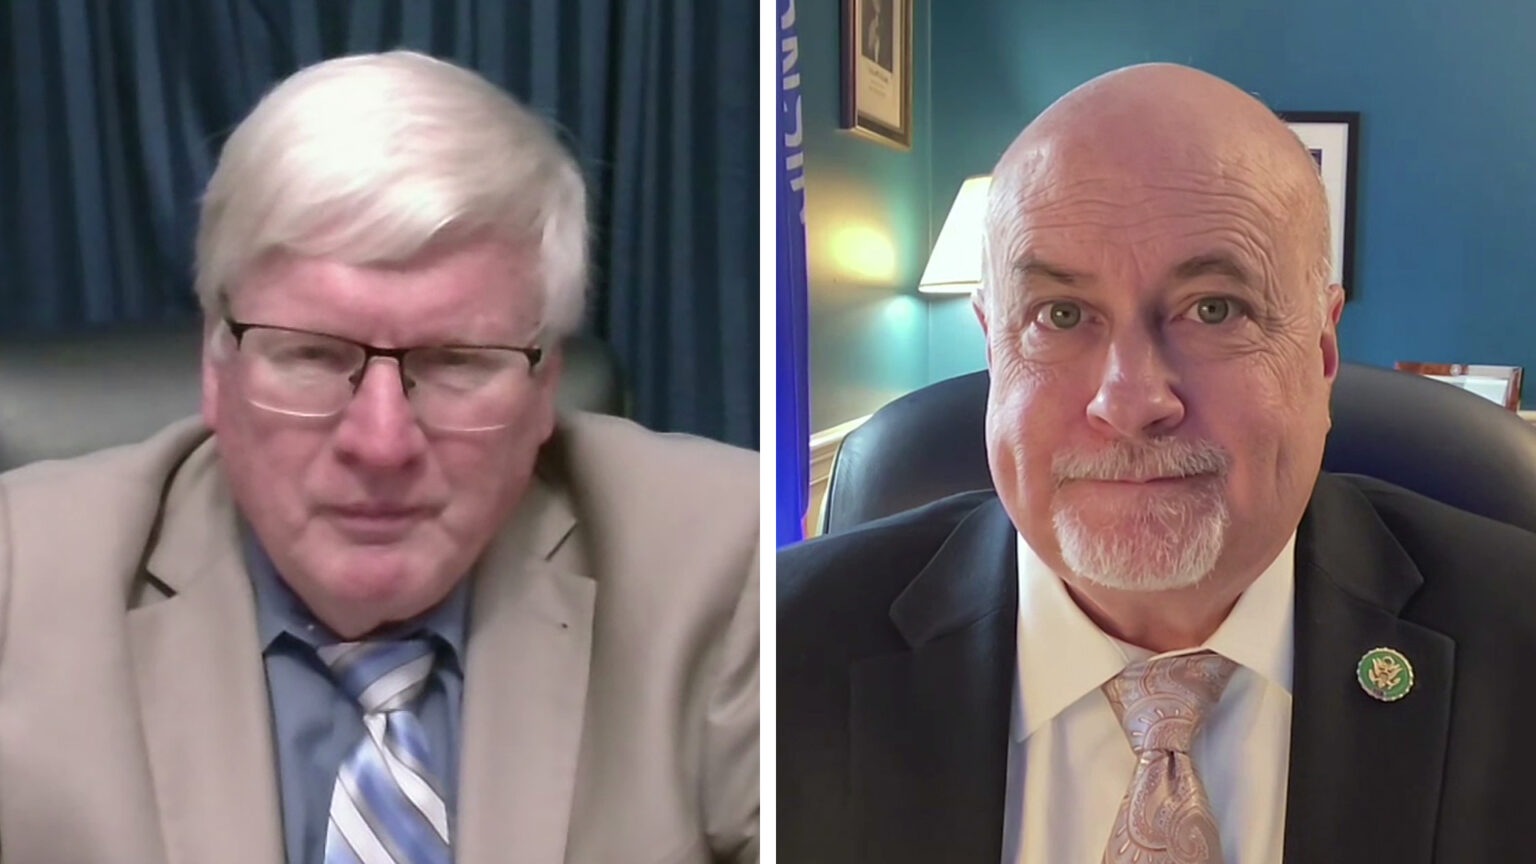 Two adjacent screenshots show Glenn Grothman and Mark Pocan seated in different locations.